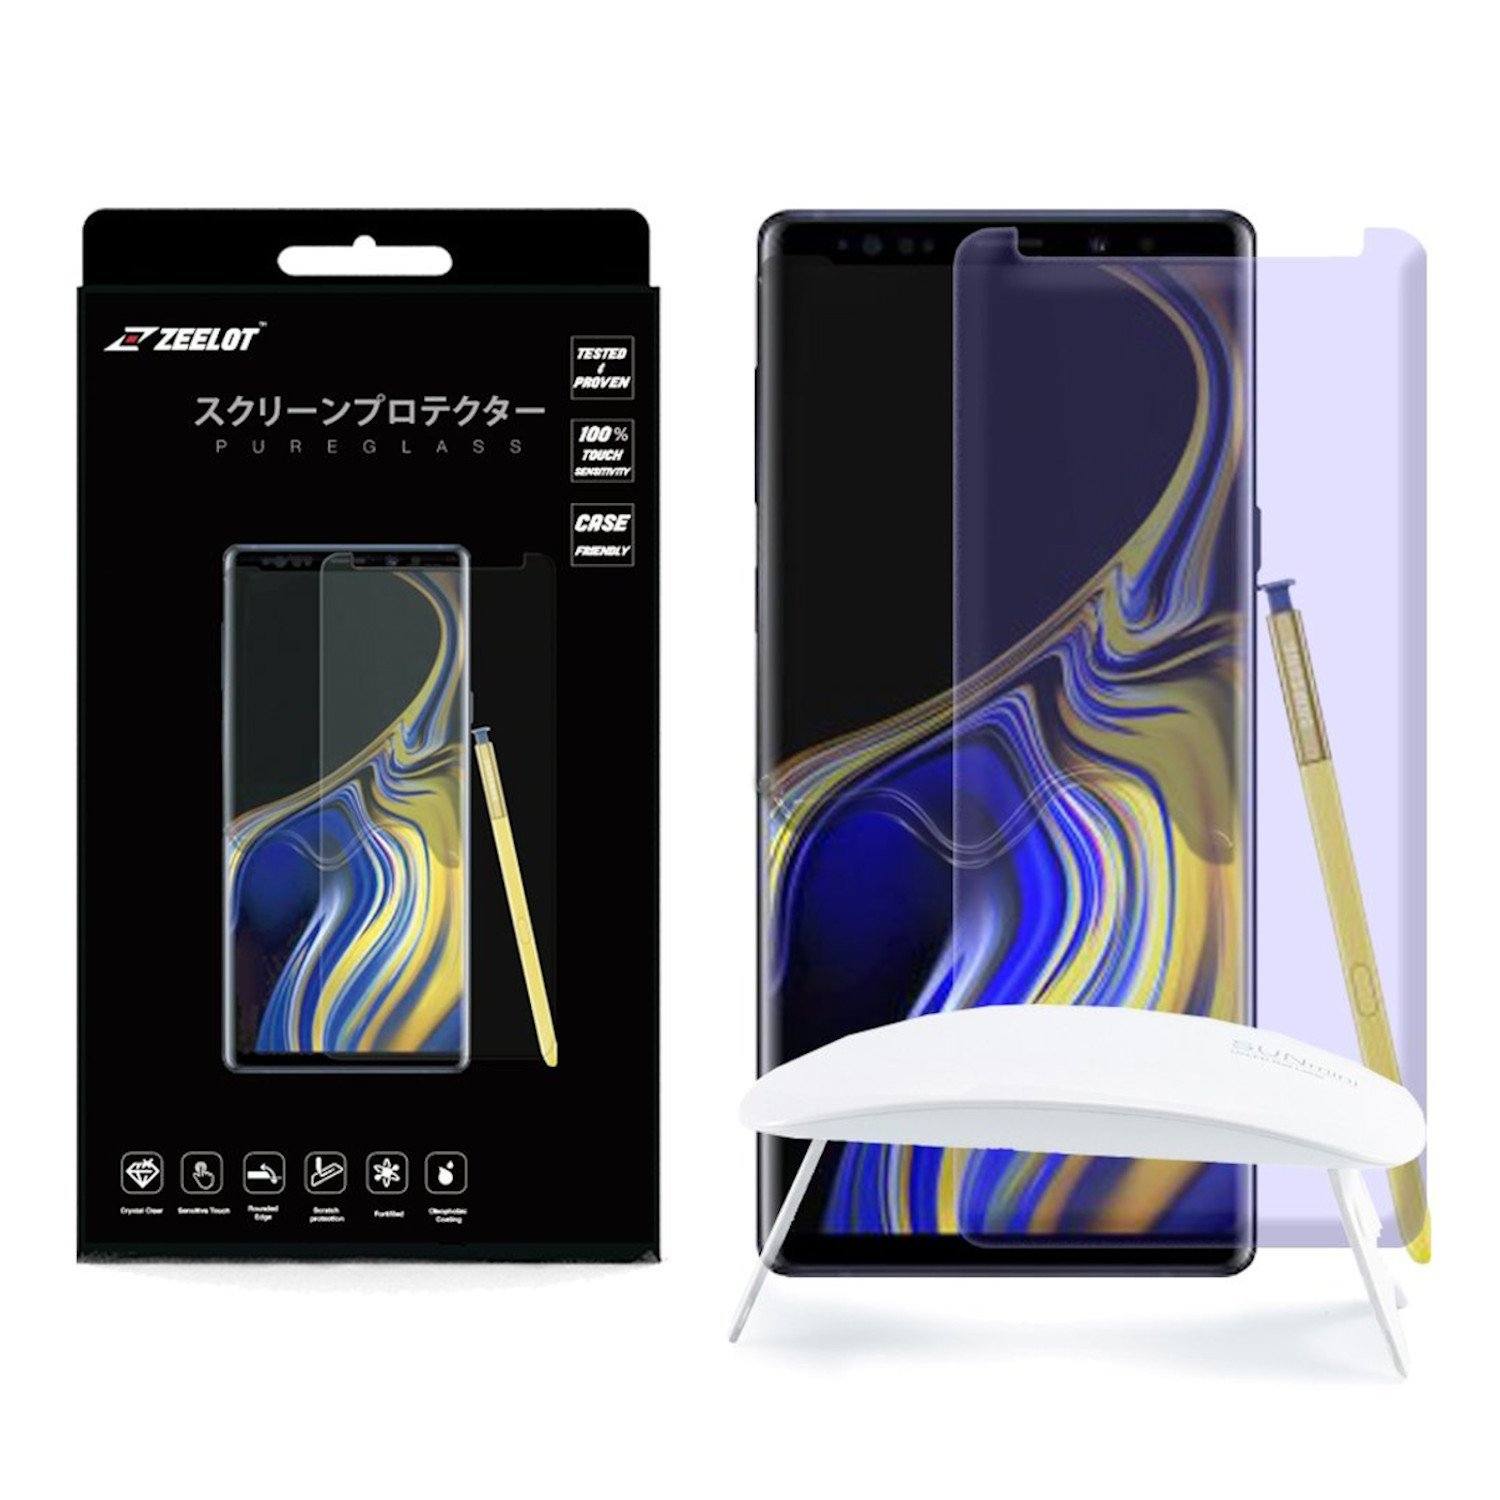 ZEELOT PureGlass 3D Anti Blue Ray LOCA Tempered Glass Screen Protector for Samsung Galaxy Note 9 LOCA Tempered Glass Zeelot 